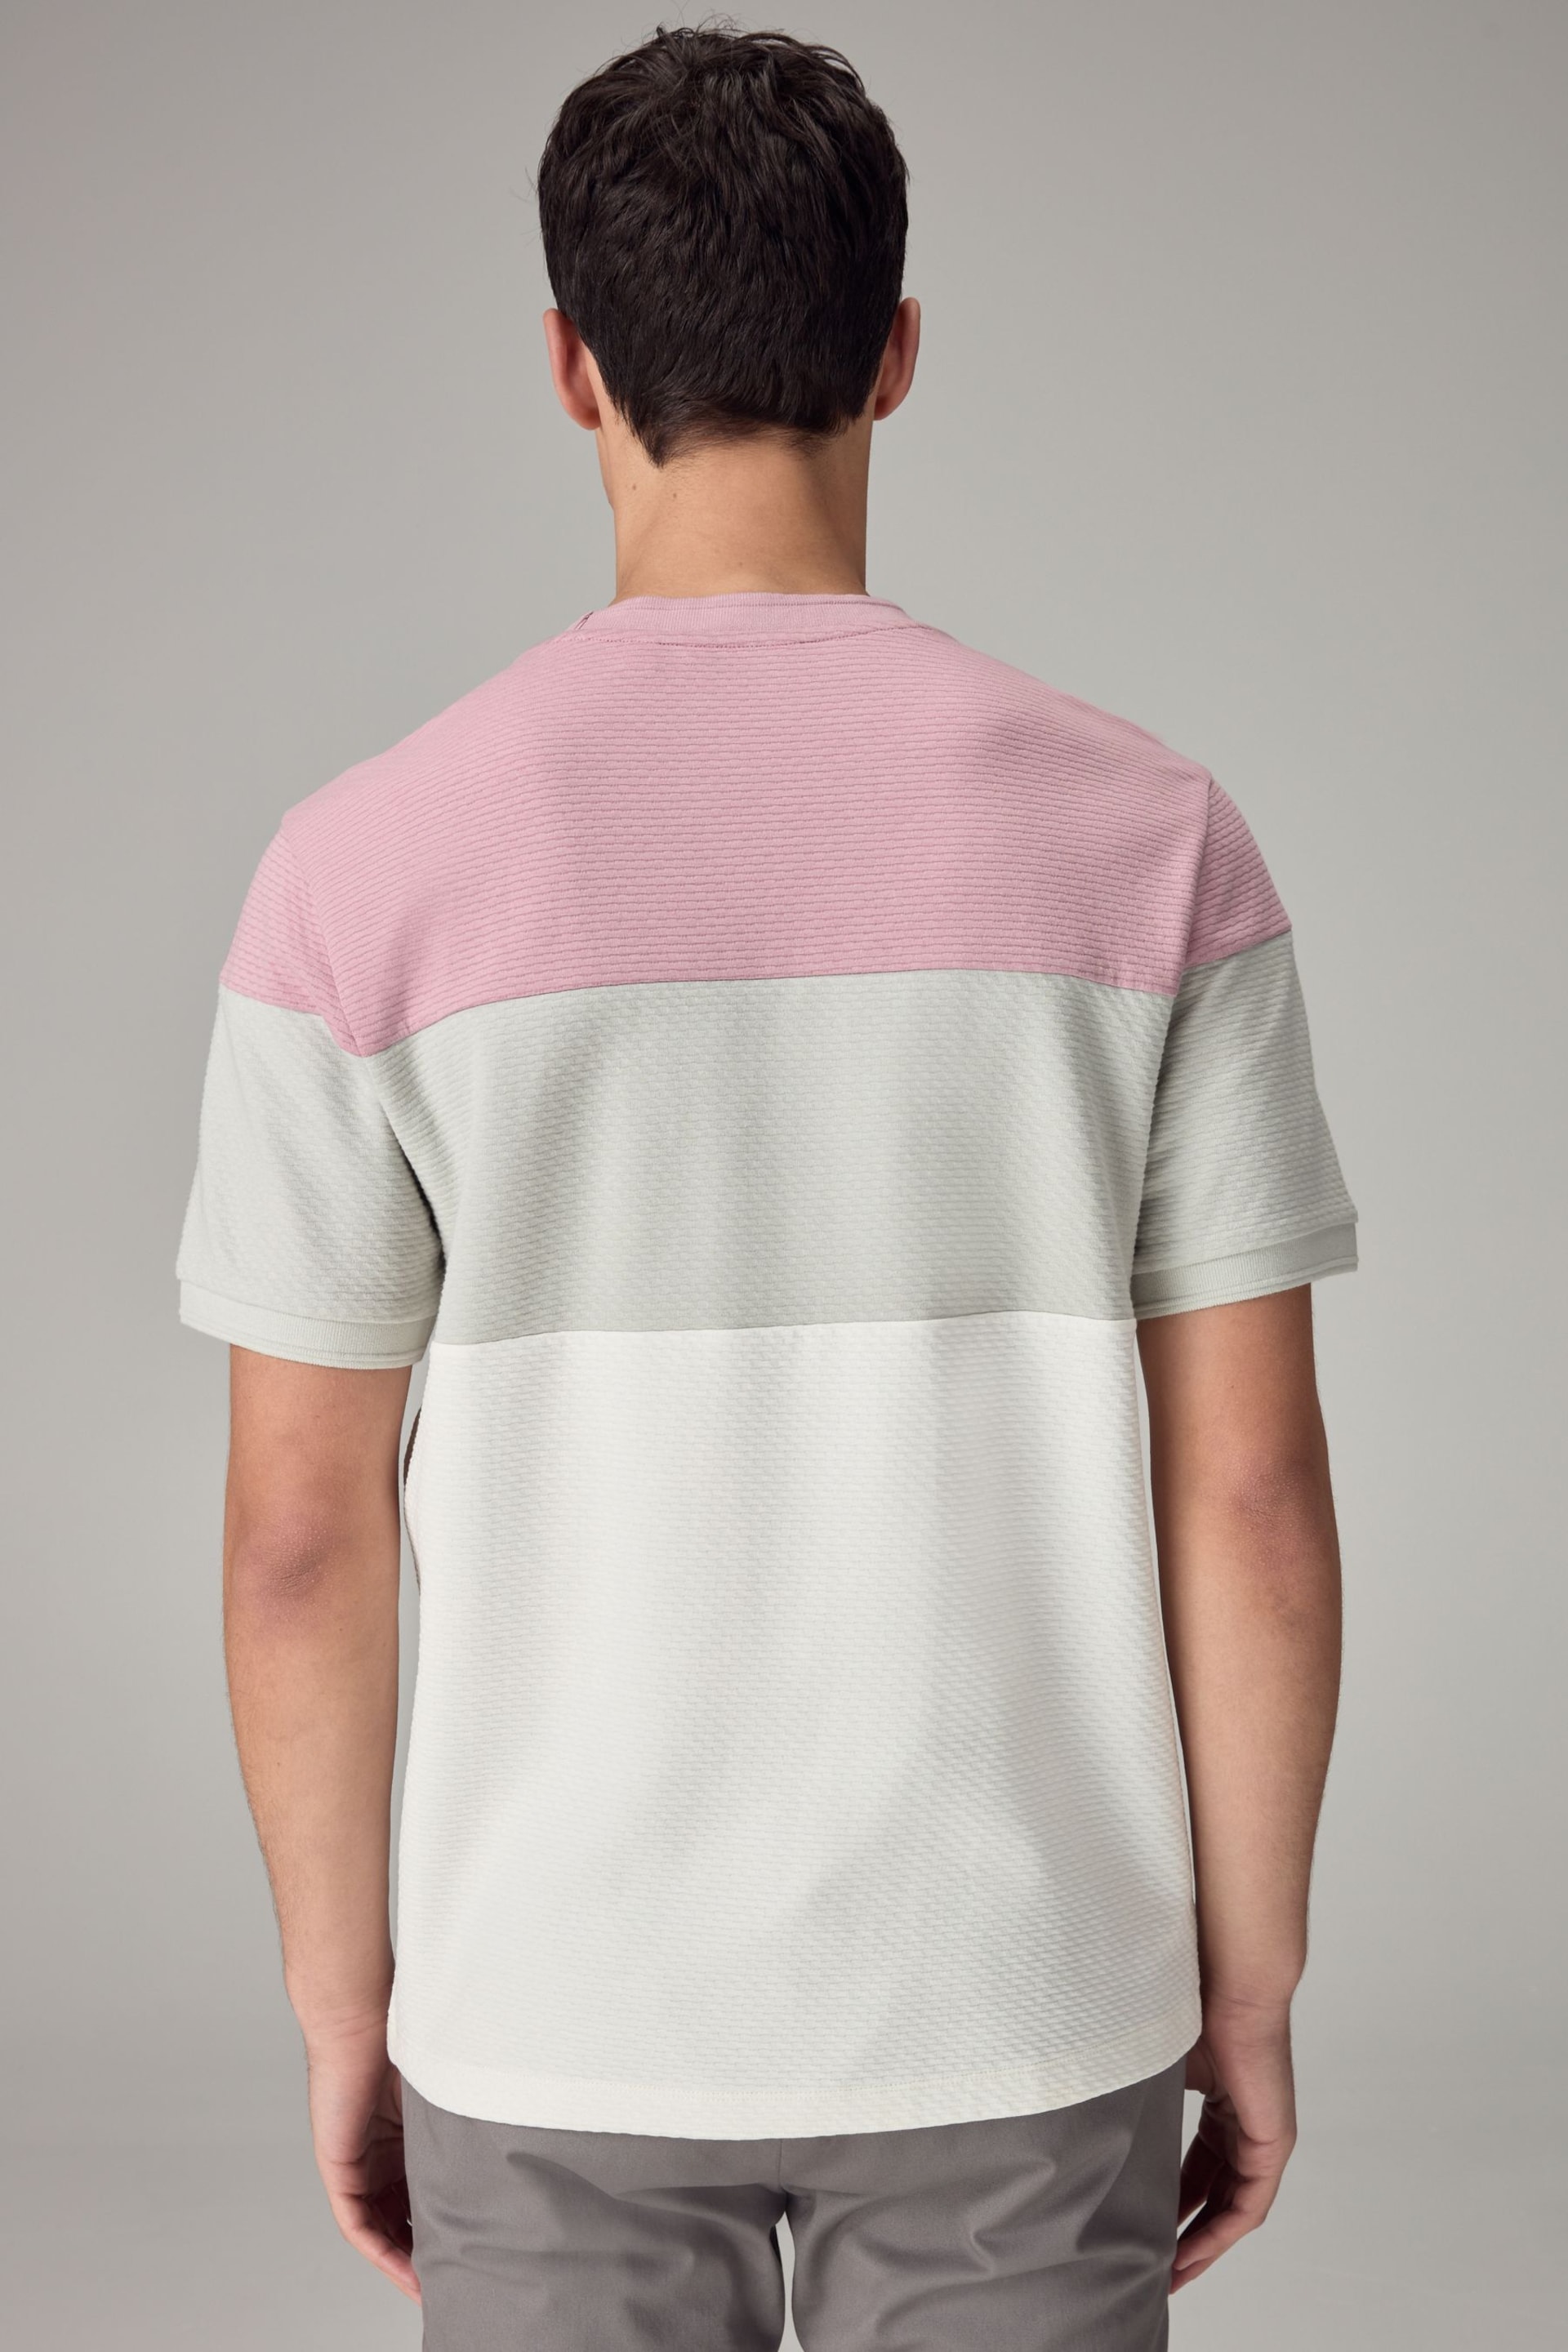 Pink/Grey/White Textured Colour Block T-Shirt - Image 3 of 7